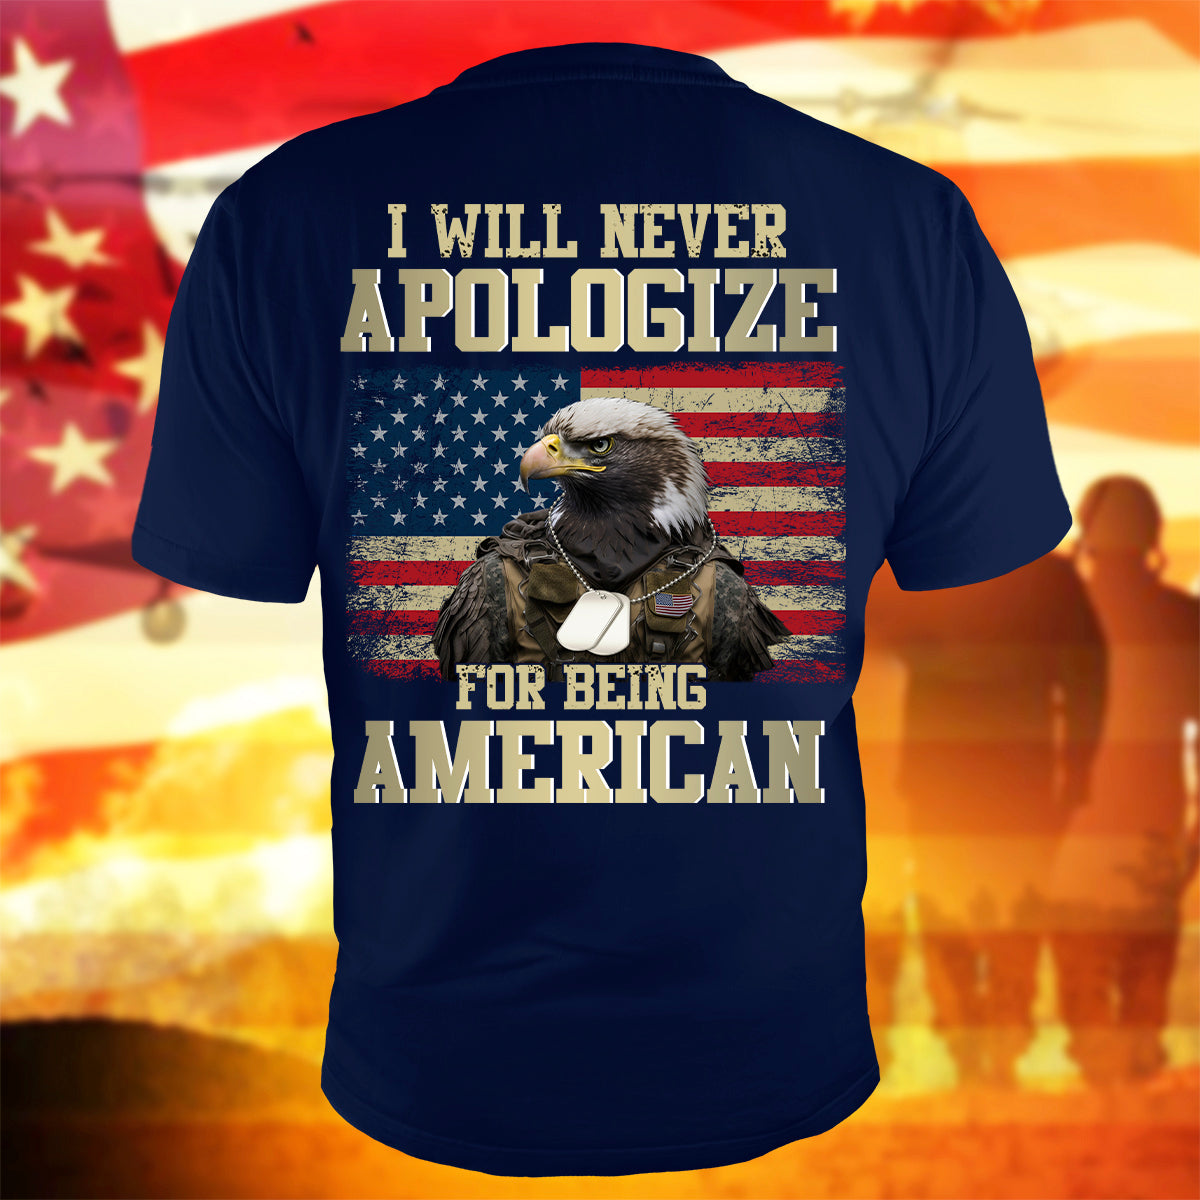 Patriotic T-Shirt I Will Never Apologize for Being American Shirt American Citizen Gift